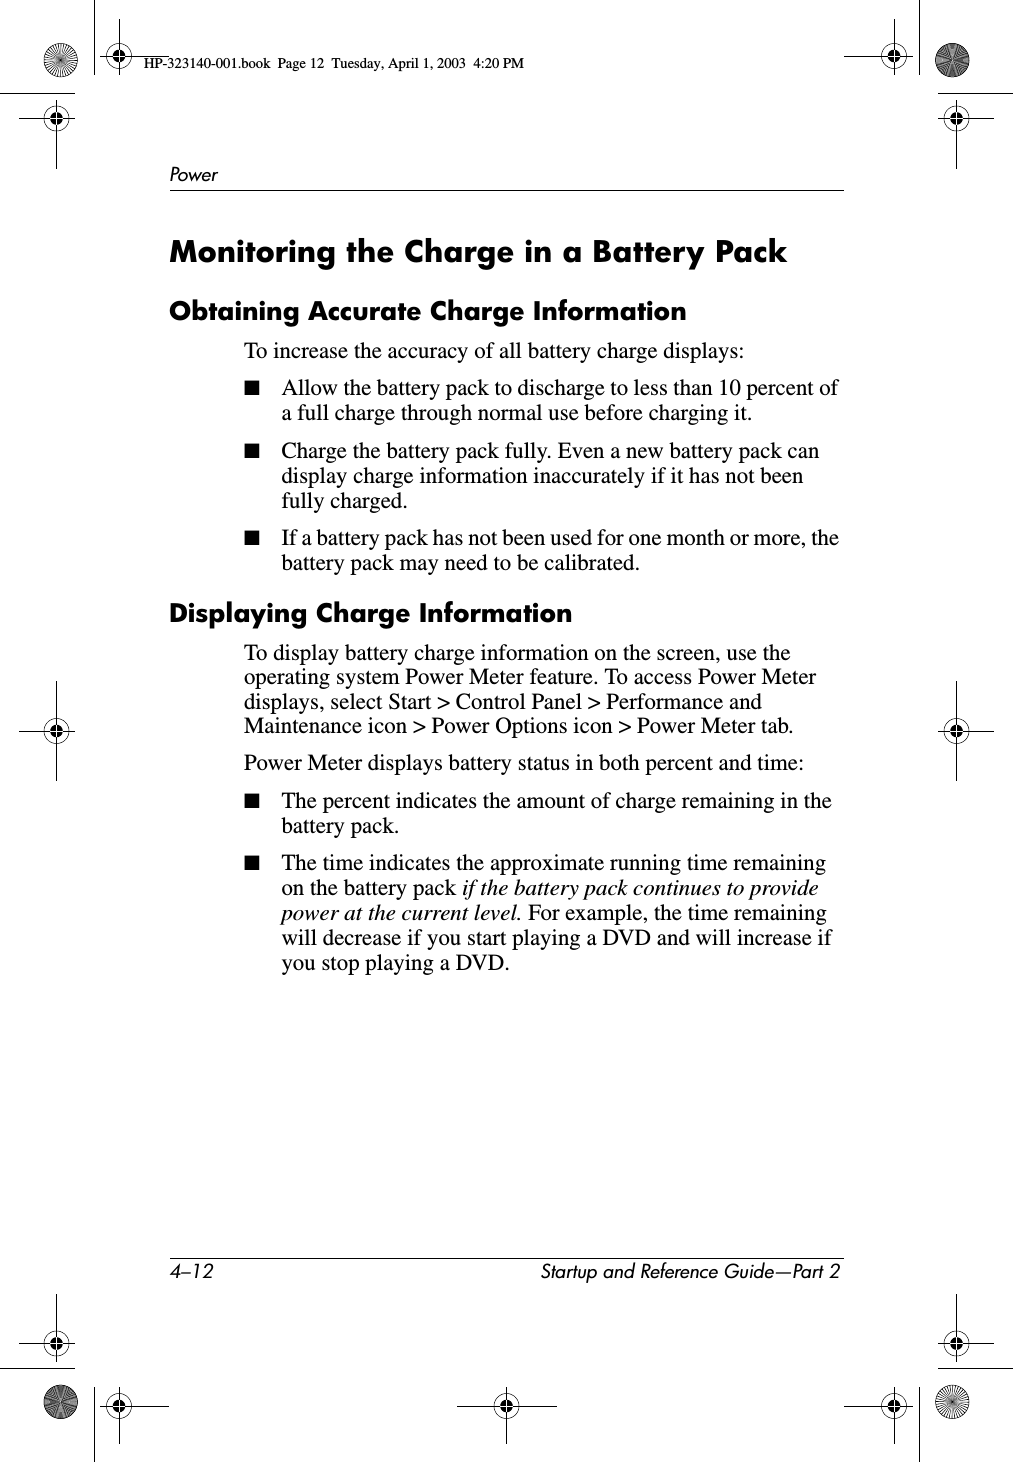 4–12 Startup and Reference Guide—Part 2PowerMonitoring the Charge in a Battery PackObtaining Accurate Charge InformationTo increase the accuracy of all battery charge displays:■Allow the battery pack to discharge to less than 10 percent of a full charge through normal use before charging it.■Charge the battery pack fully. Even a new battery pack can display charge information inaccurately if it has not been fully charged.■If a battery pack has not been used for one month or more, the battery pack may need to be calibrated.Displaying Charge InformationTo display battery charge information on the screen, use the operating system Power Meter feature. To access Power Meter displays, select Start &gt; Control Panel &gt; Performance and Maintenance icon &gt; Power Options icon &gt; Power Meter tab.Power Meter displays battery status in both percent and time:■The percent indicates the amount of charge remaining in the battery pack.■The time indicates the approximate running time remaining on the battery pack if the battery pack continues to provide power at the current level. For example, the time remaining will decrease if you start playing a DVD and will increase if you stop playing a DVD.HP-323140-001.book  Page 12  Tuesday, April 1, 2003  4:20 PM